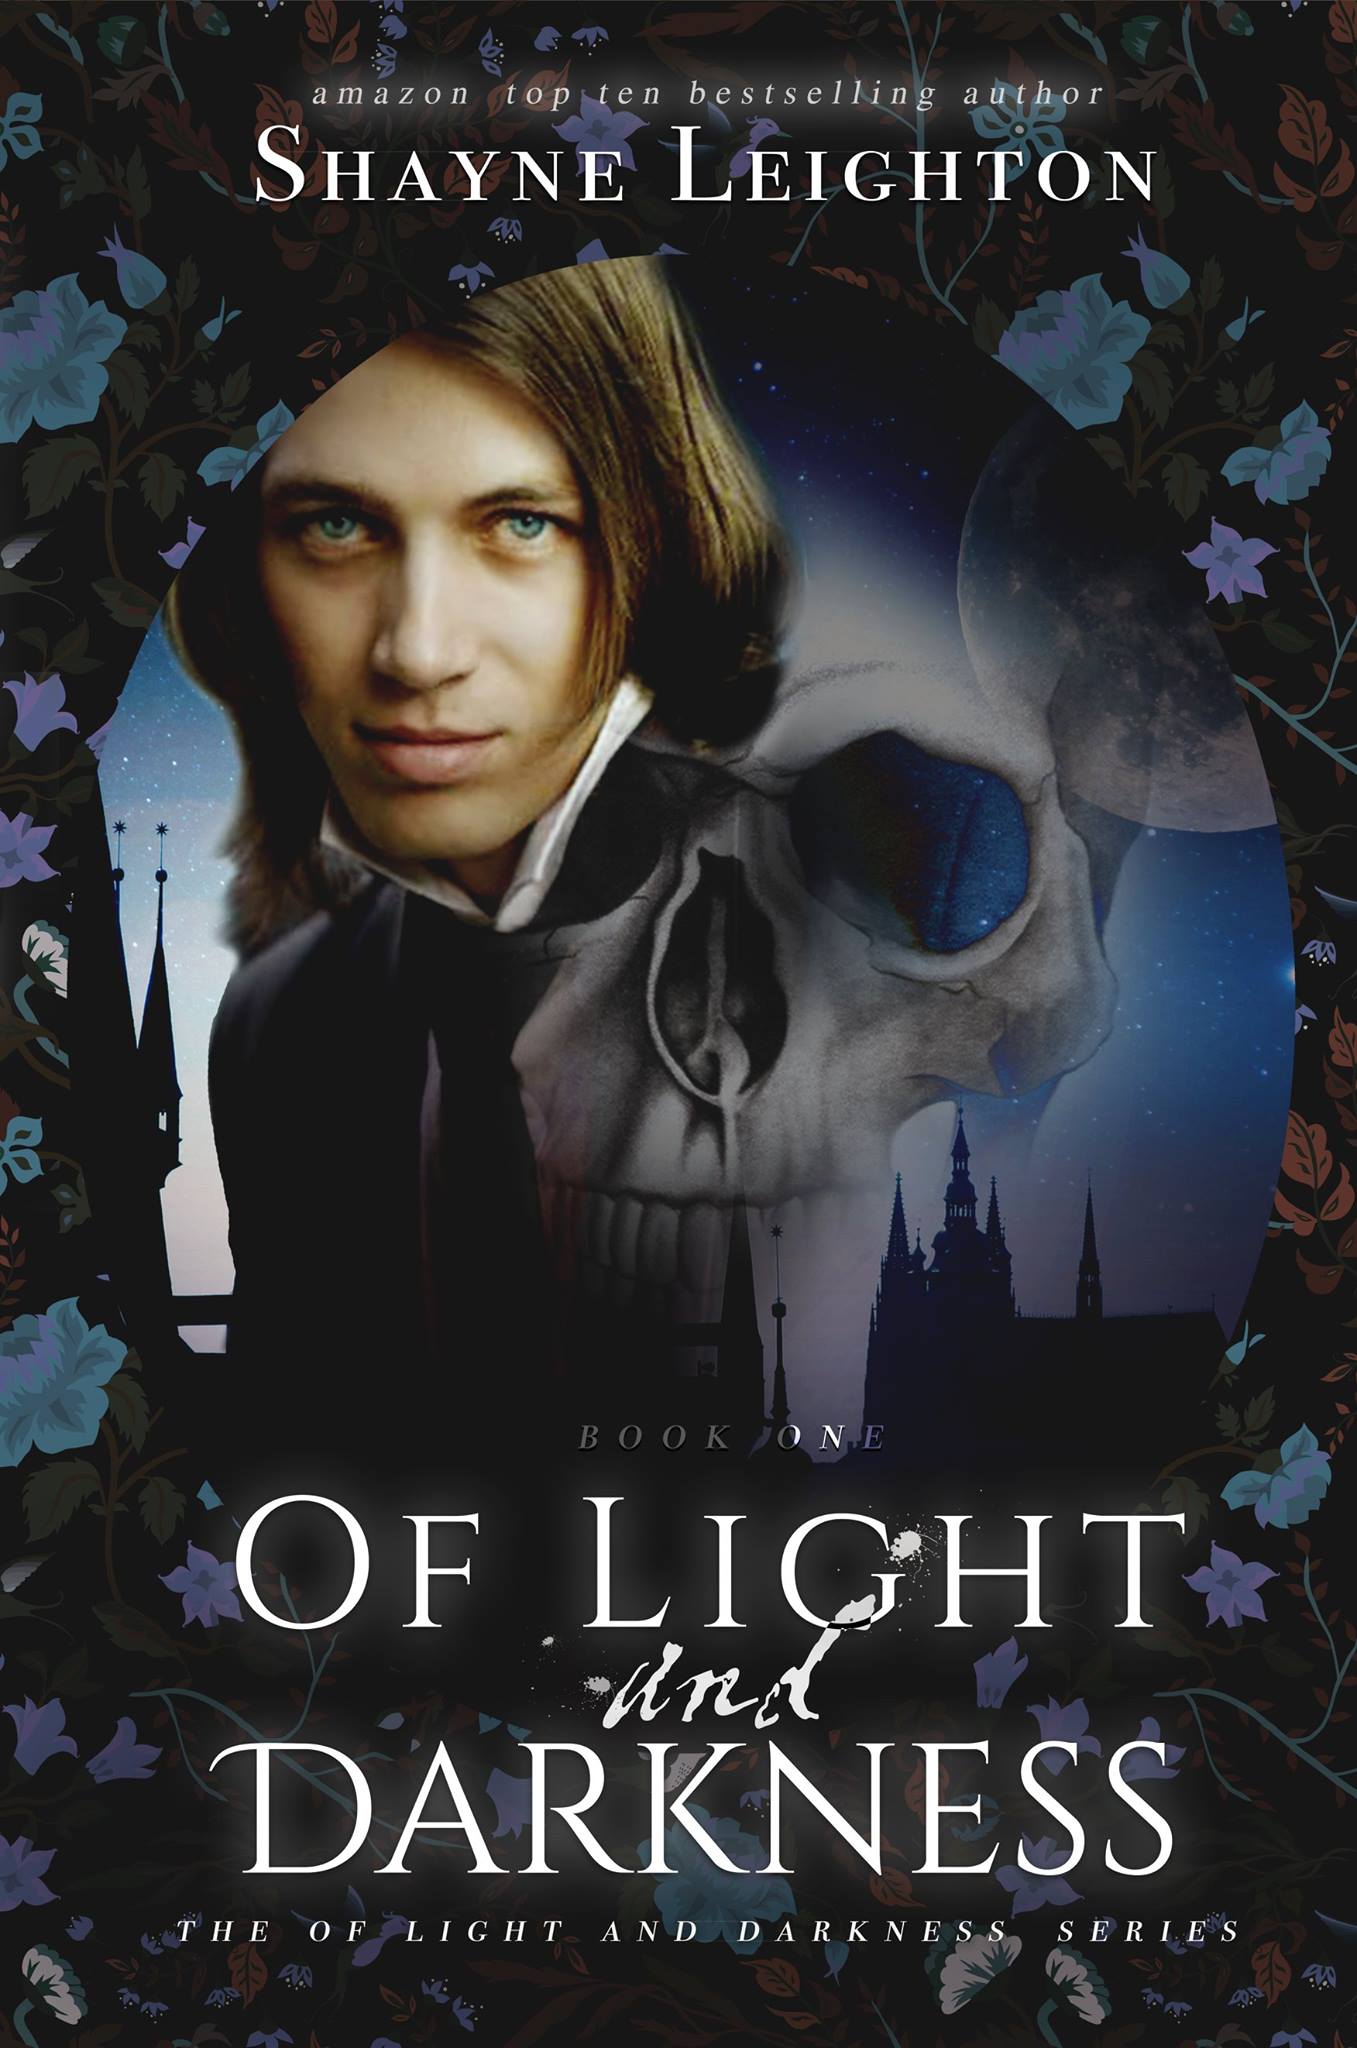 FREE: Of Light and Darkness by Shayne Leighton